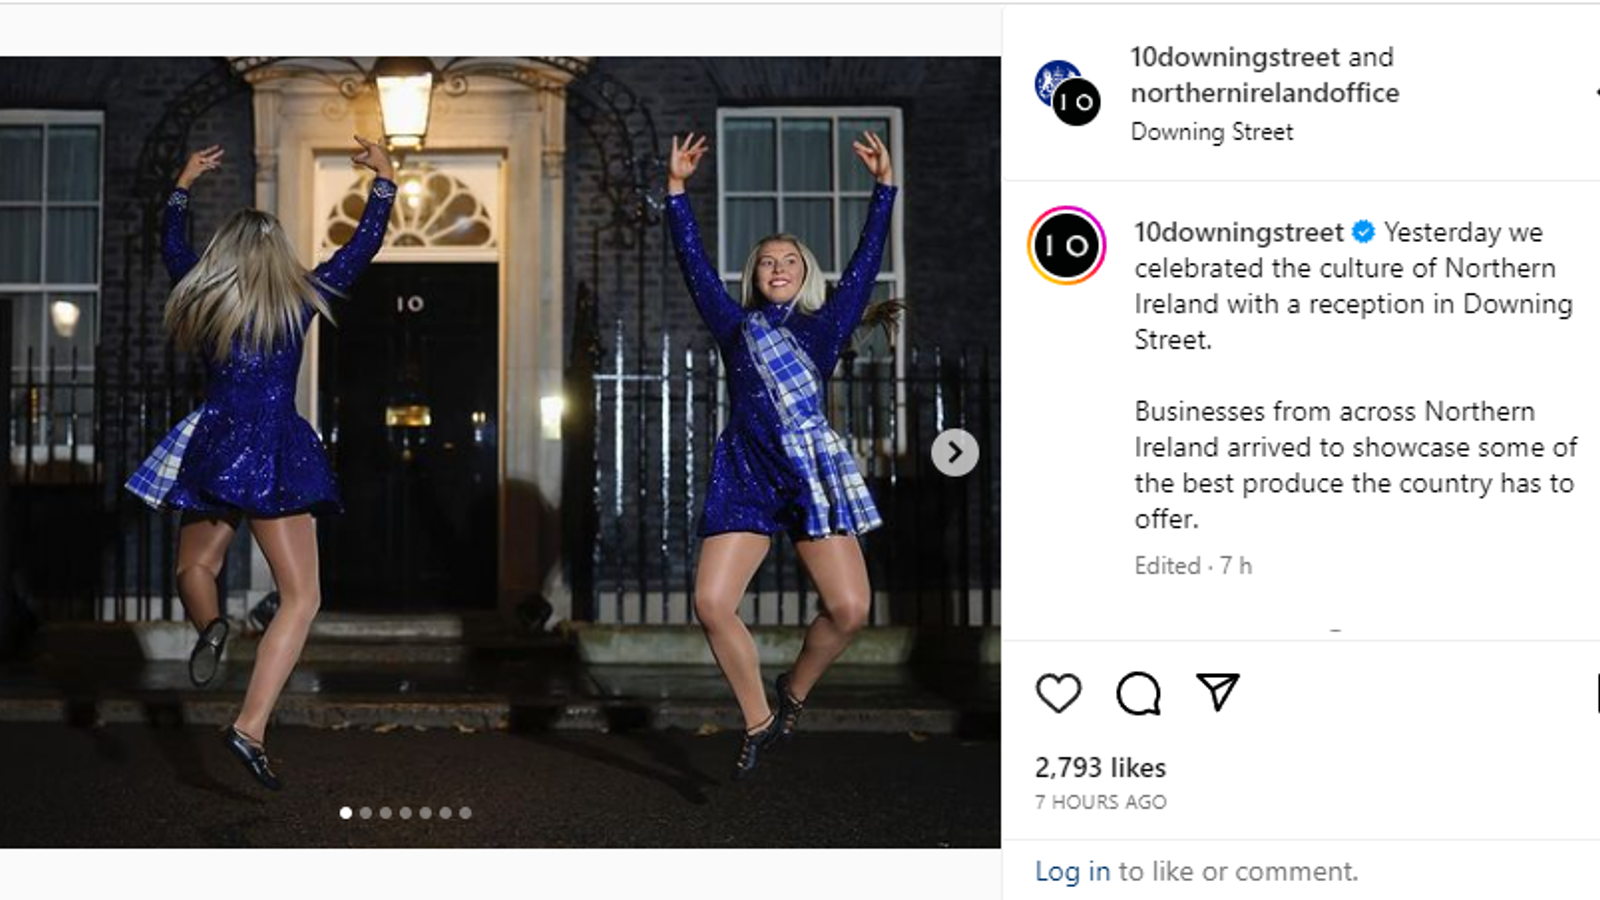 Downing Street admits to 'unfortunate mistake' after Irish tricolour displayed on Instagram post celebrating Northern Ireland